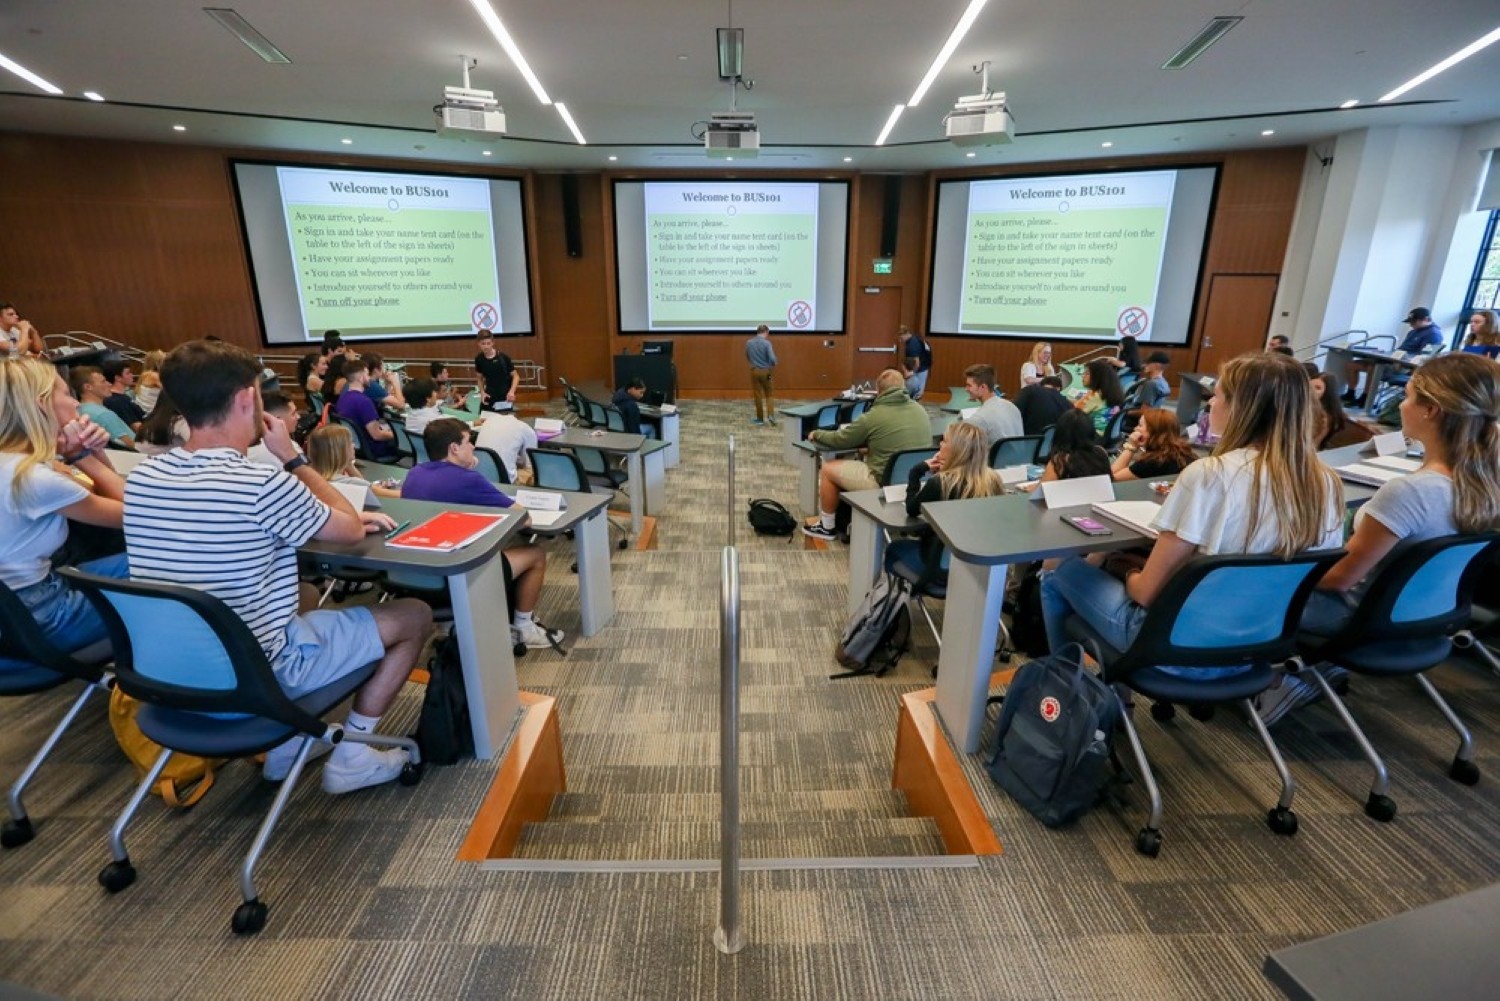 Meehan 103 - The Team Based Learning Hall